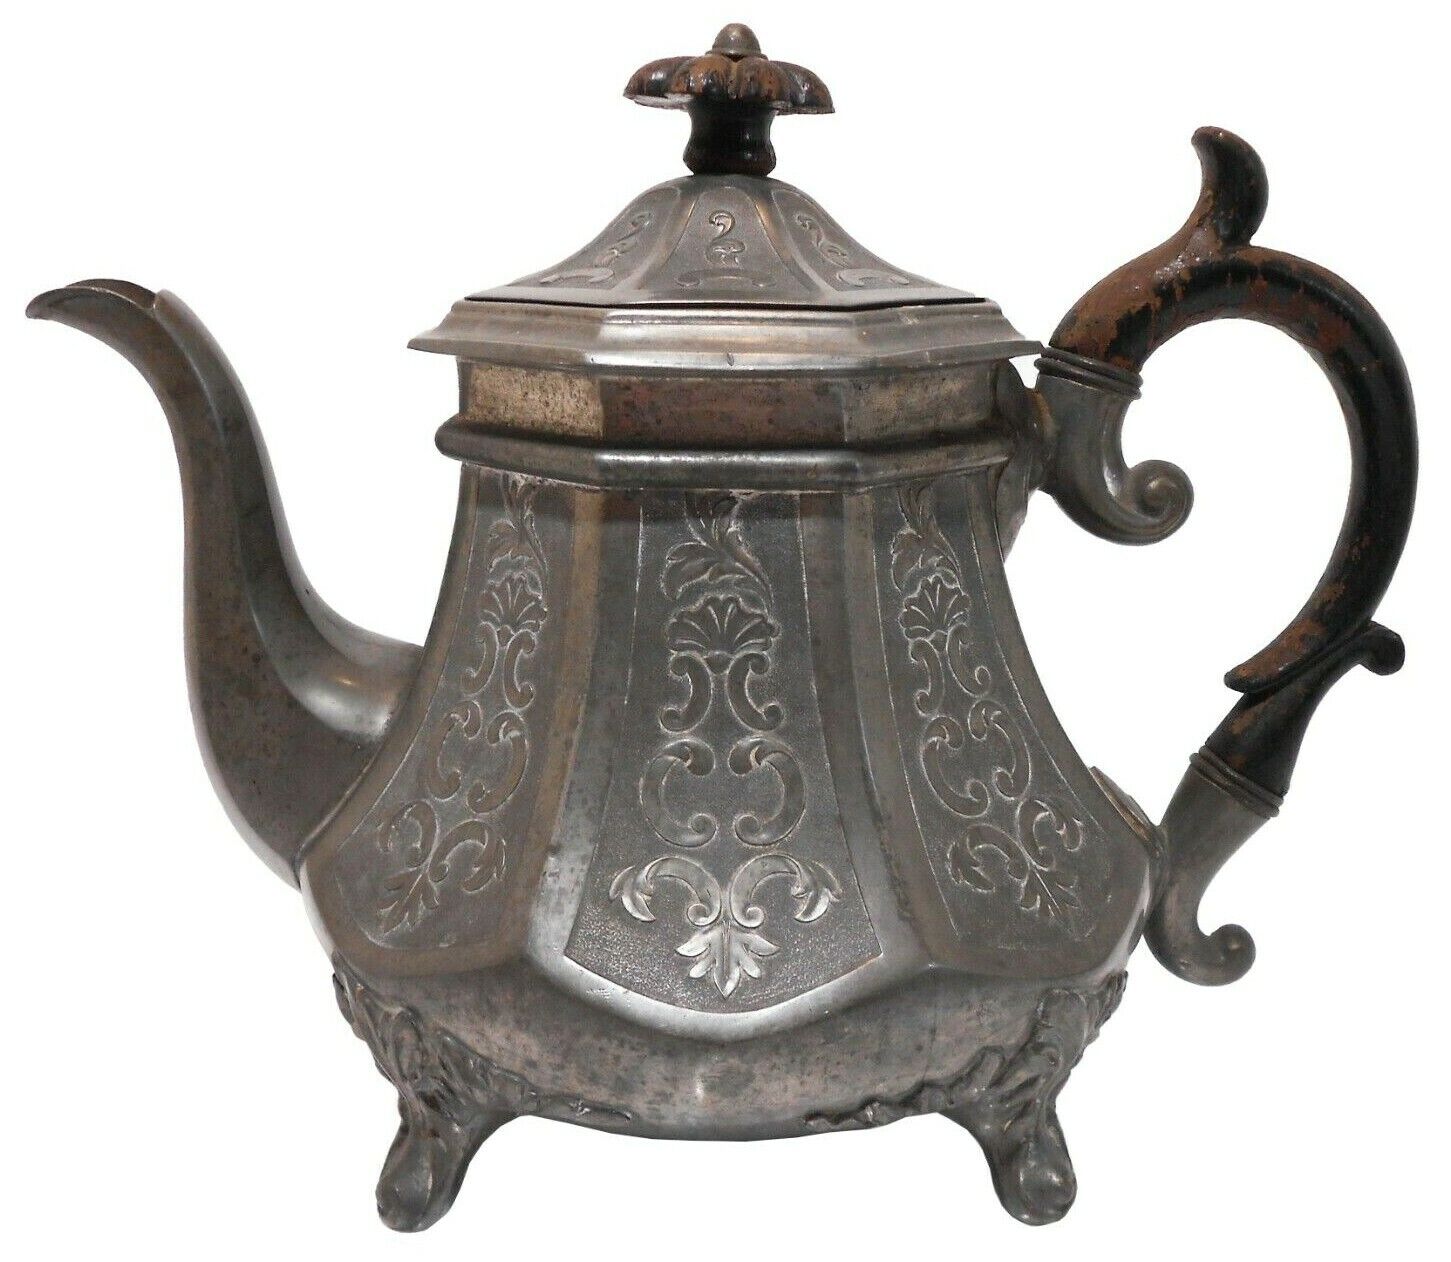 EARLY-MID 19TH C JAMES DIXON & SONS PEWTER TEAPOT W/PAINTED WOOD HANDLE/LID PULL